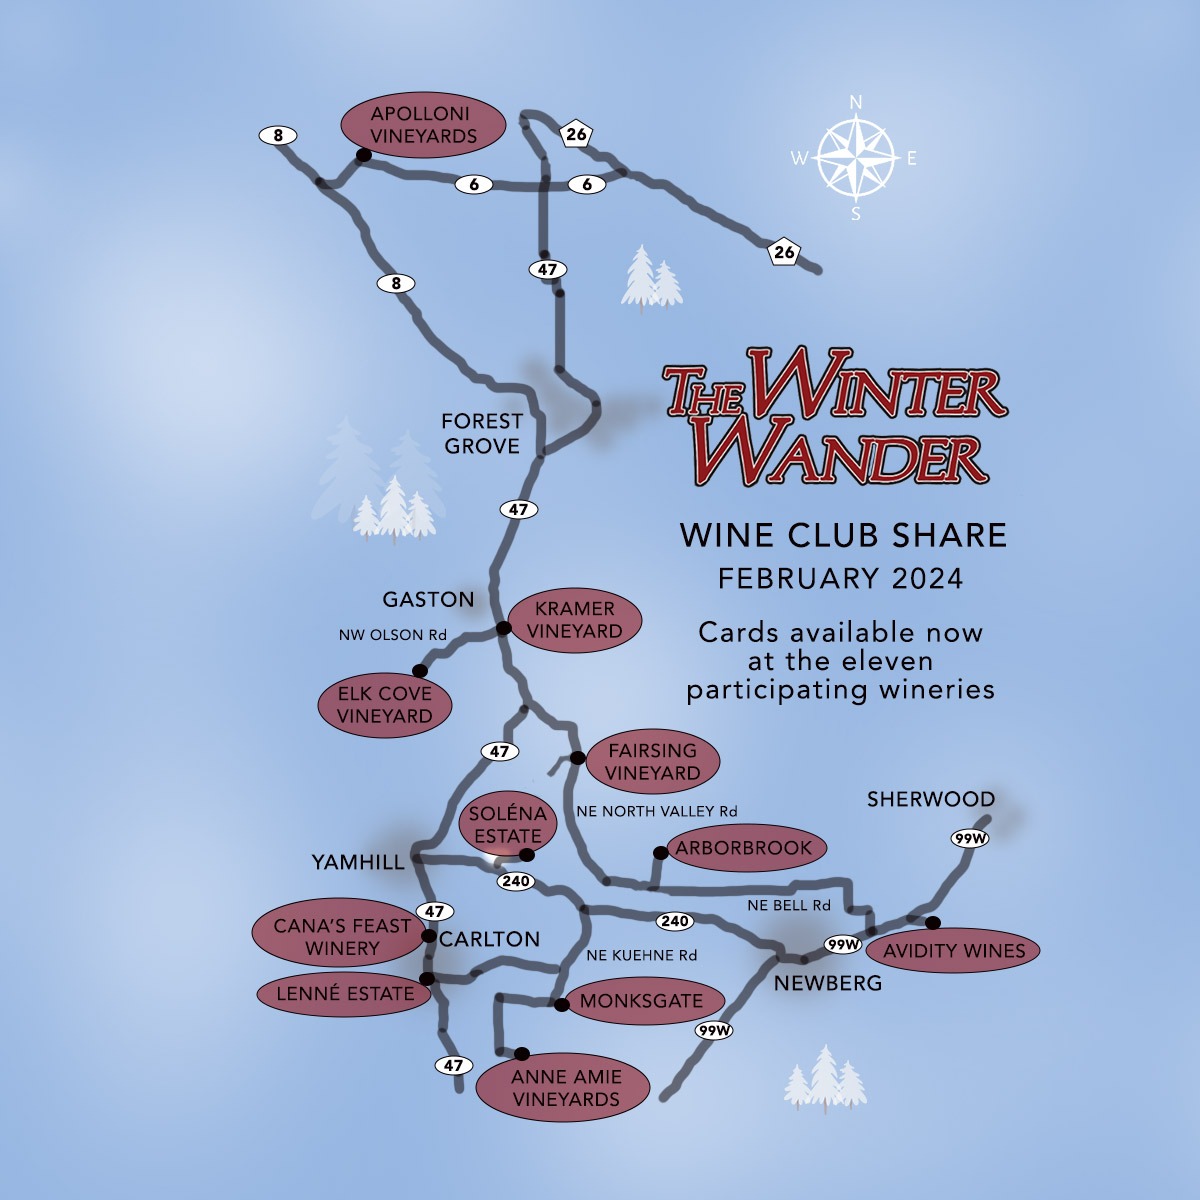 The Winter Wander Wine Club share features 11 wineries sharing select membership benefits during February 2024